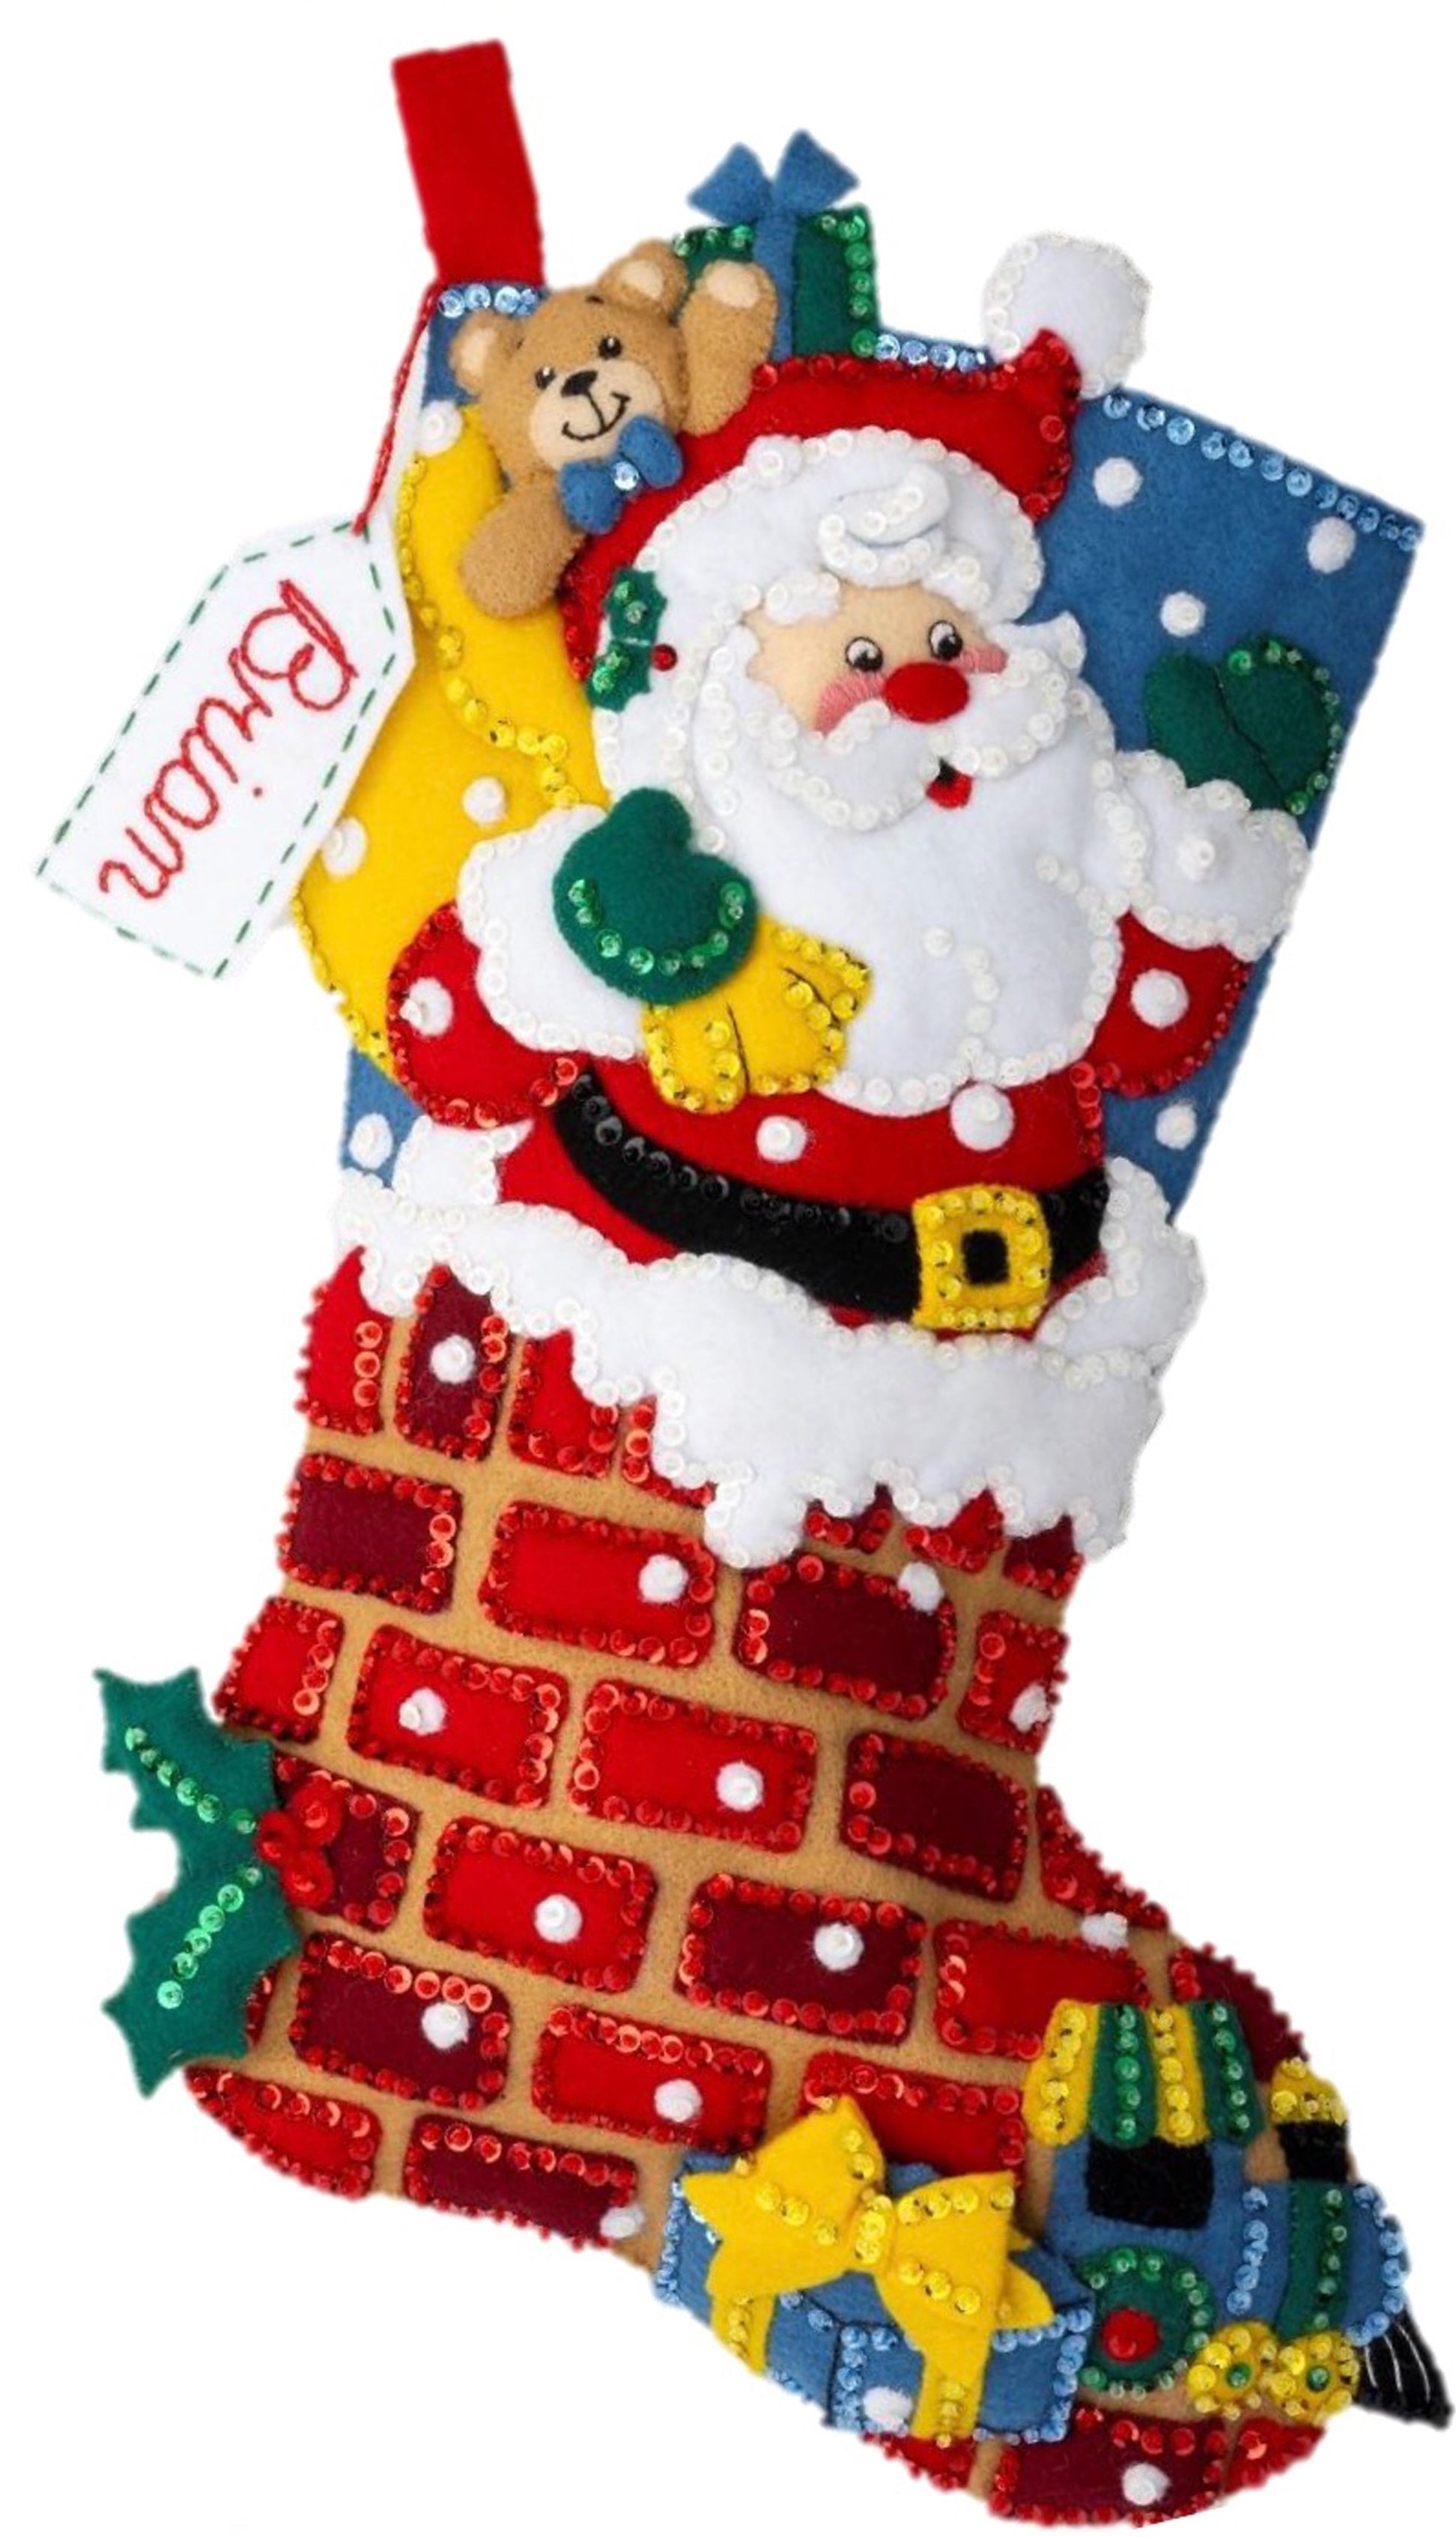 Bucilla Felt Christmas stocking kit. Design features santa with his bag of toys  heading down the chimney.